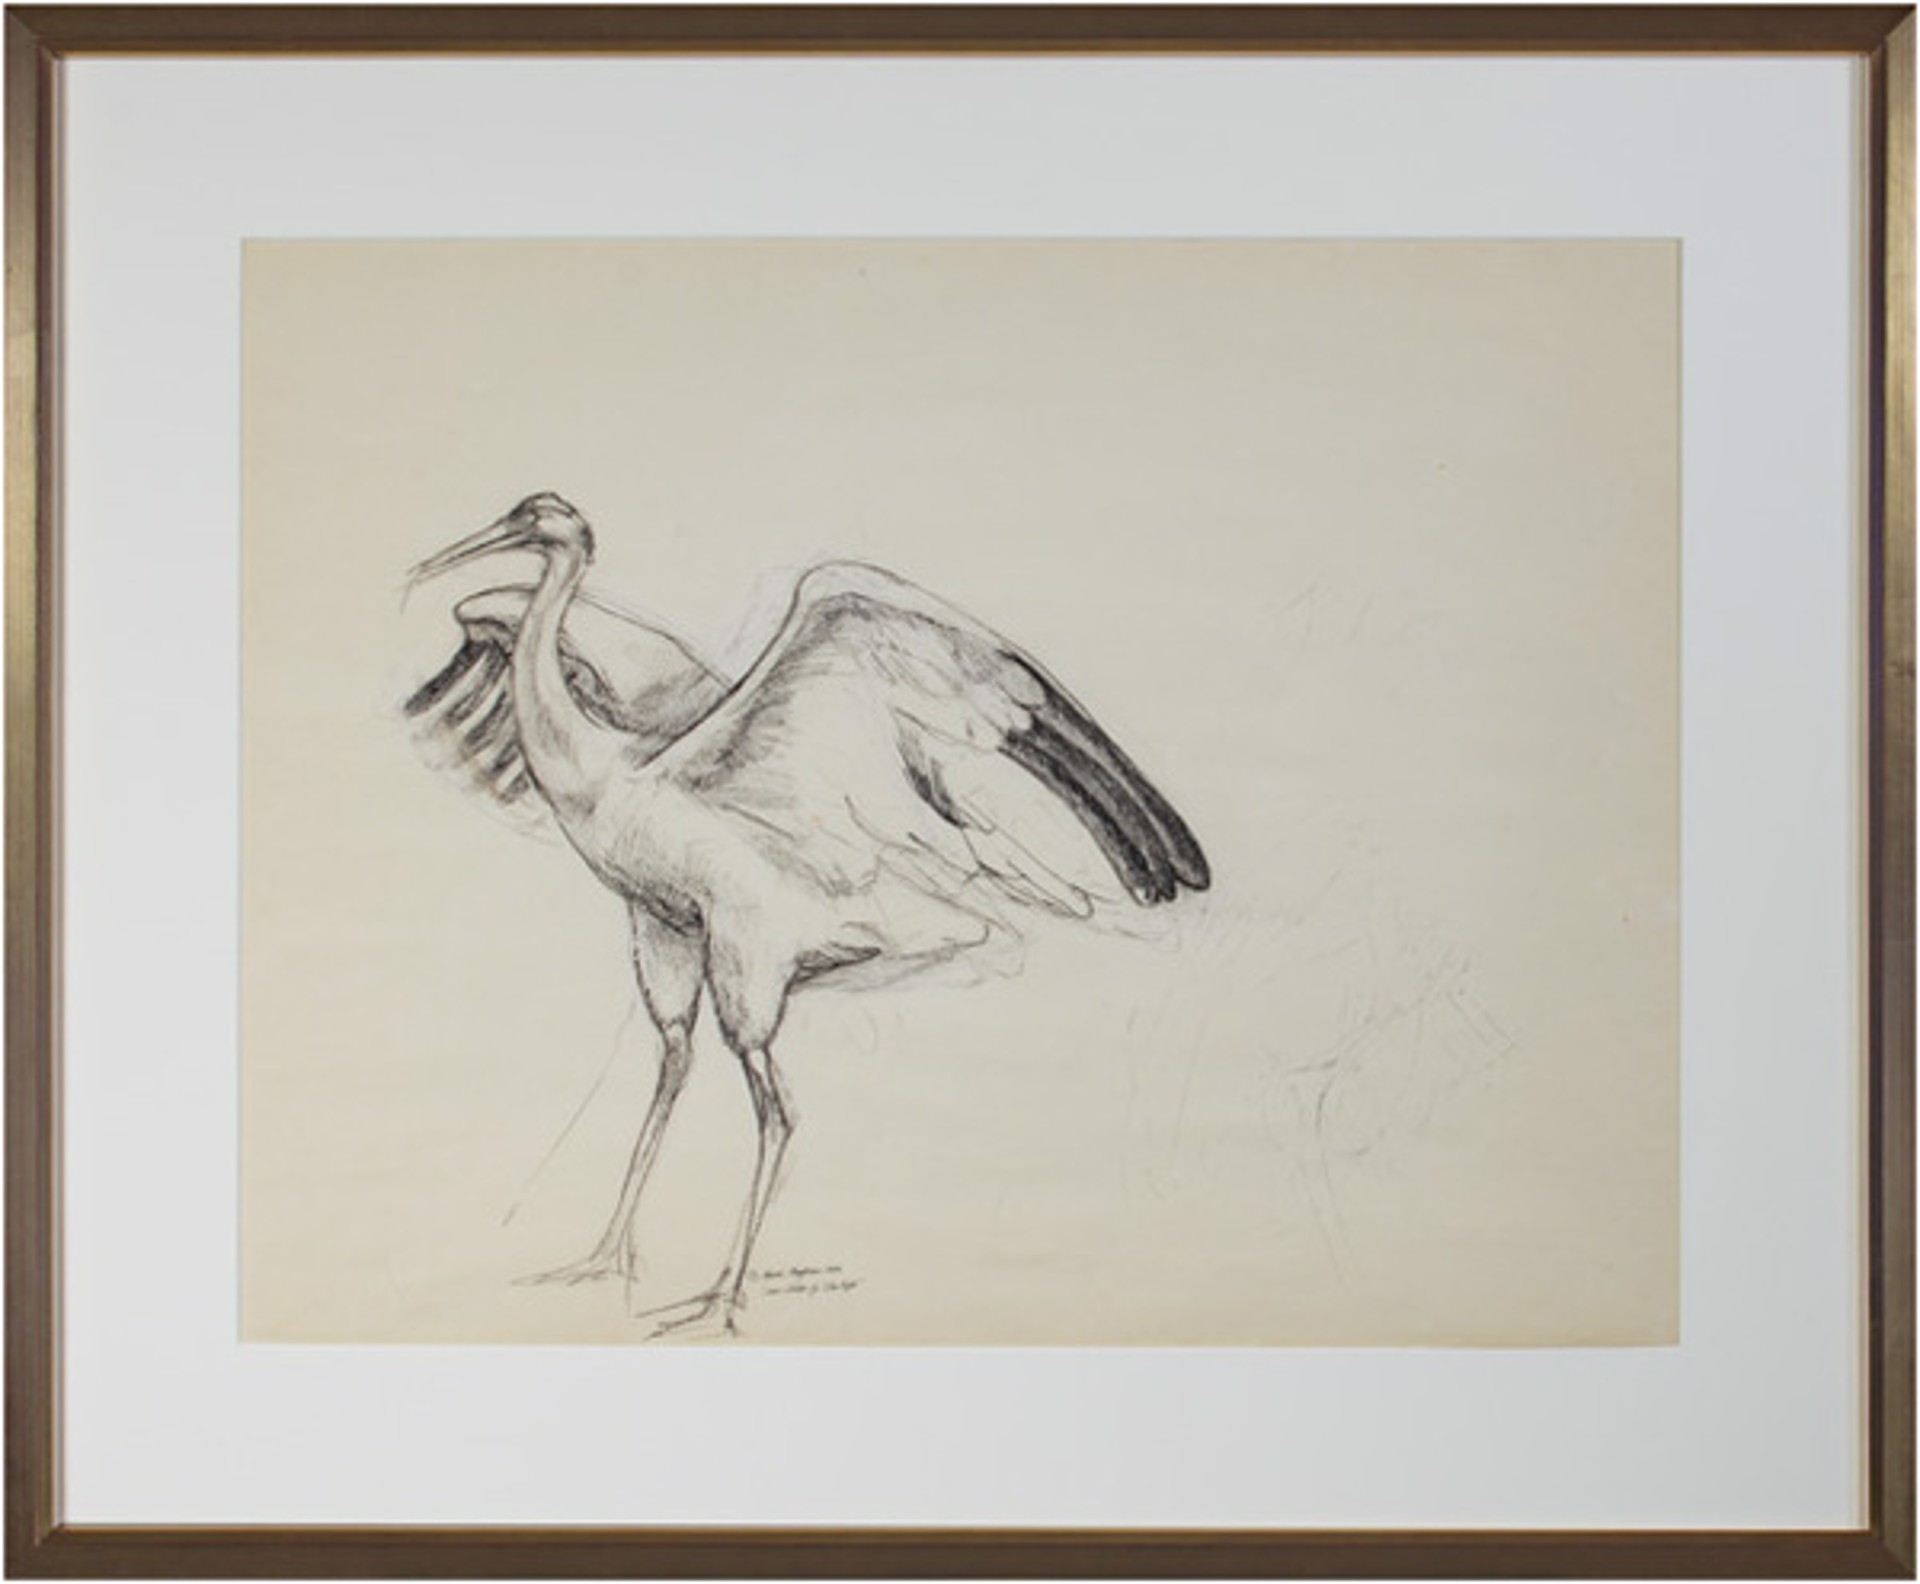 Crane sketch for "The Gift" by Karin Krohne Kaufman